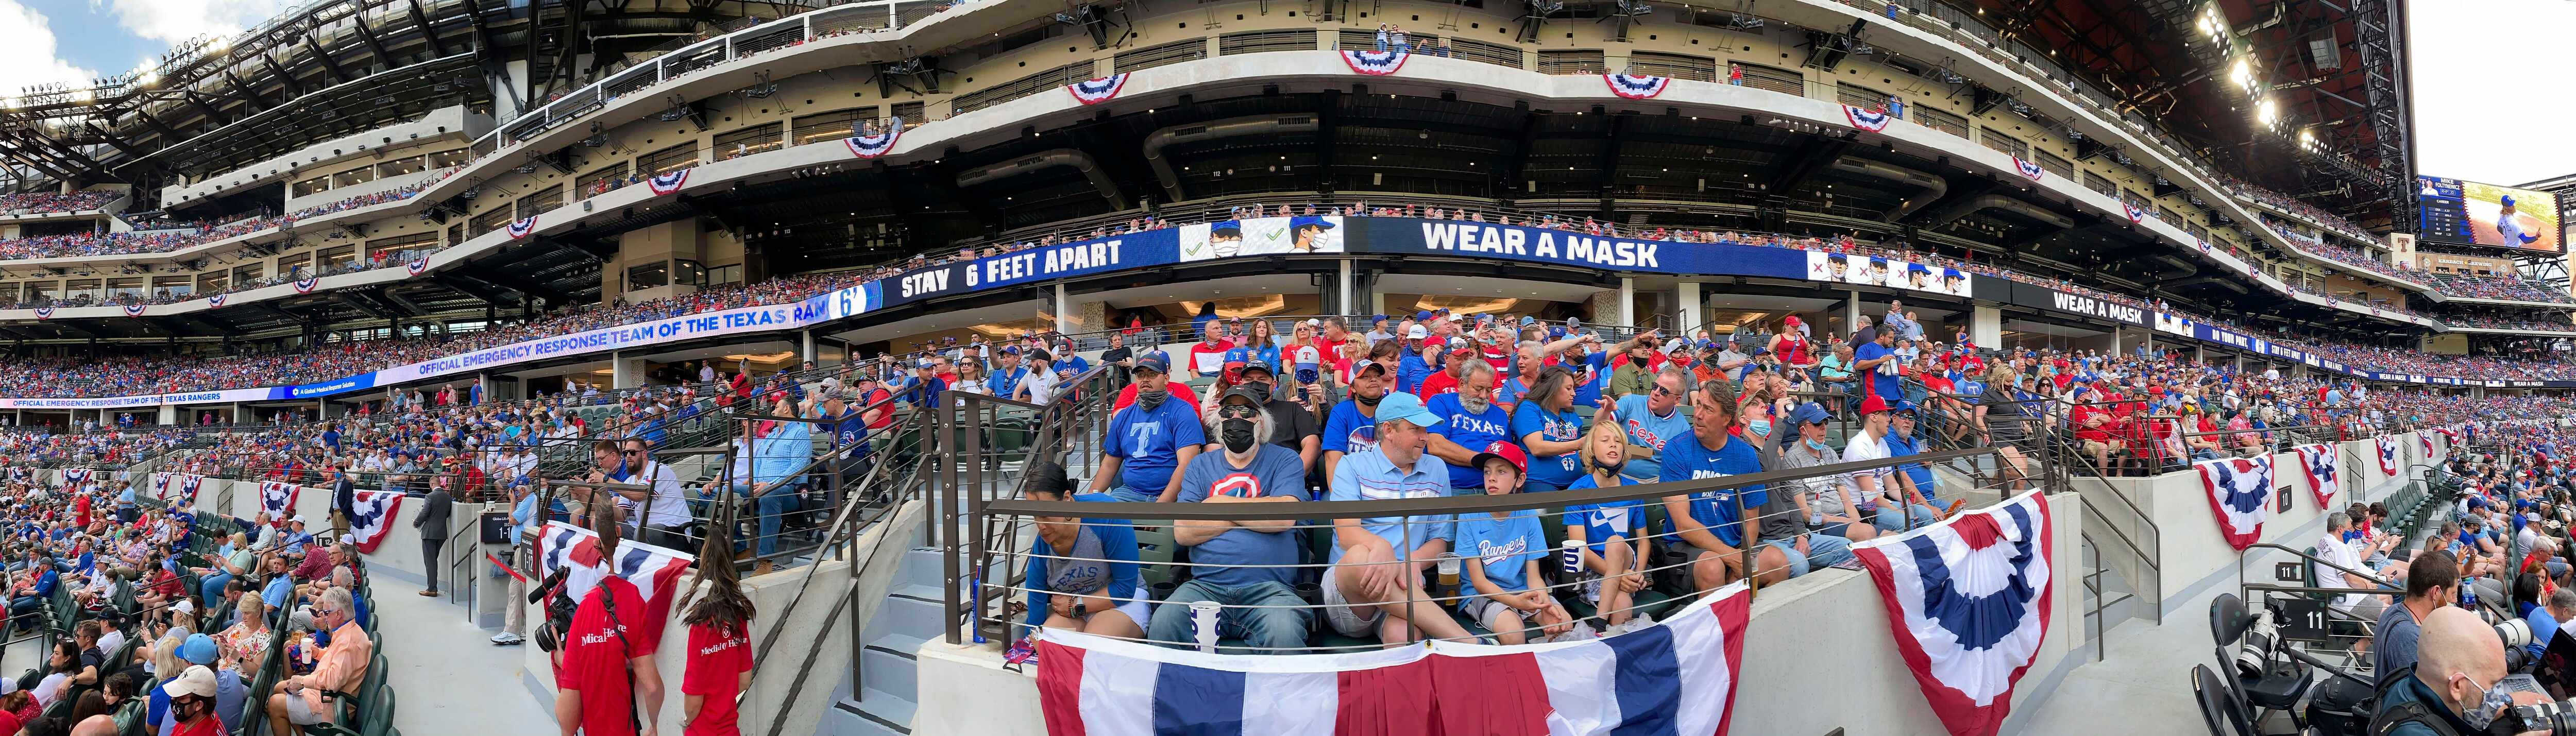 In a panoramic view, the The Texas Rangers baseball team reminded a nearly sold-out crowd to...